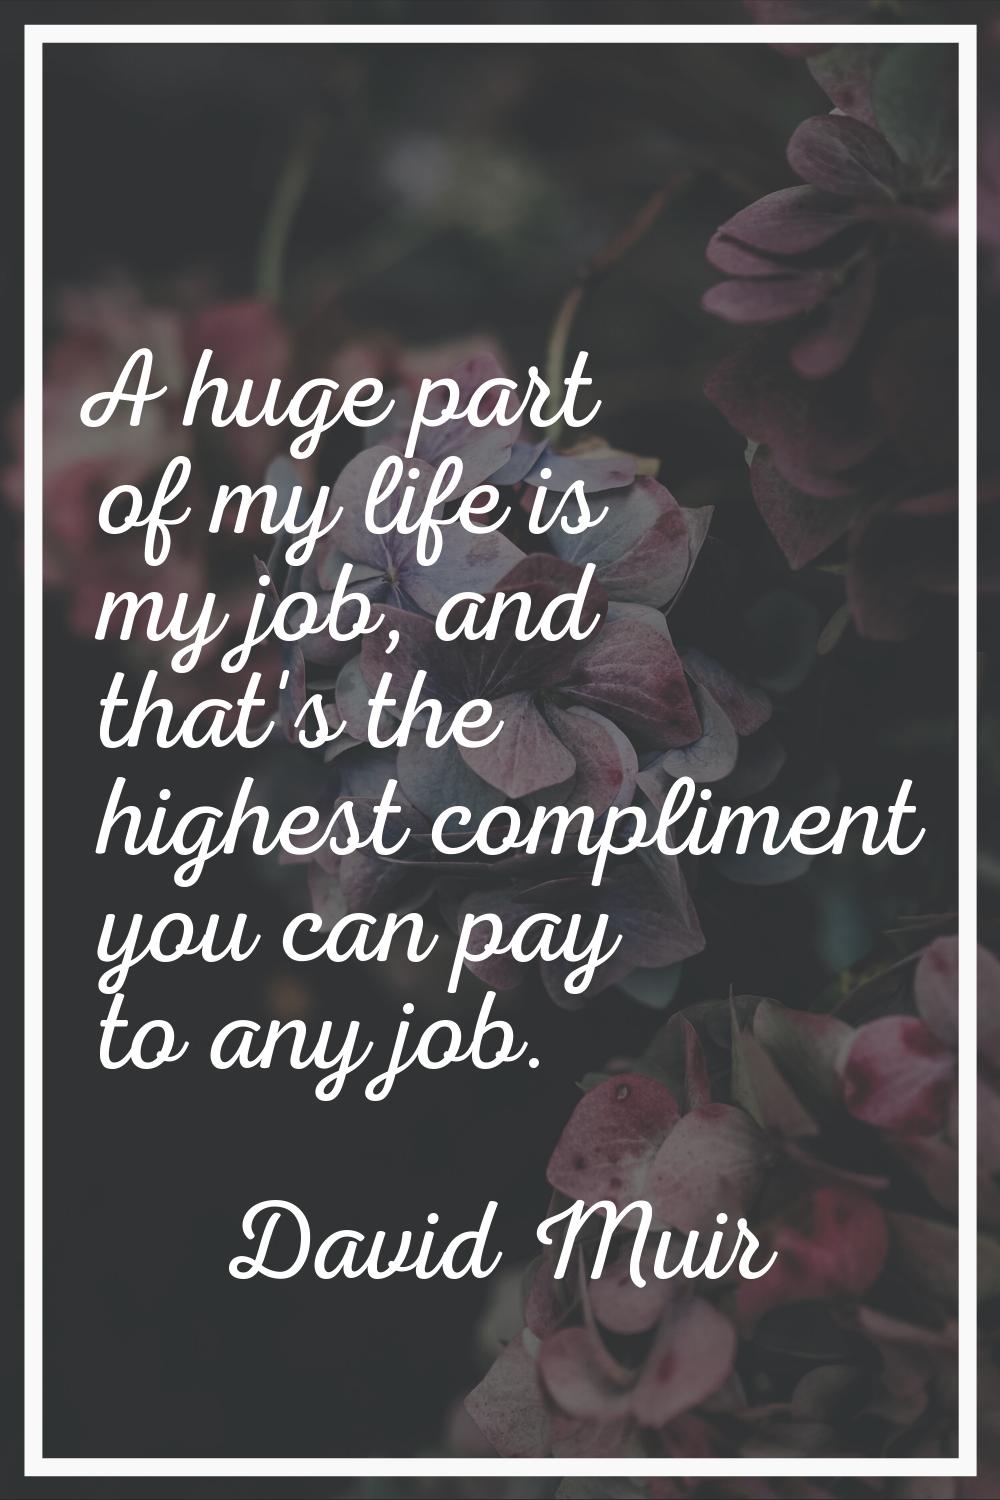 A huge part of my life is my job, and that's the highest compliment you can pay to any job.